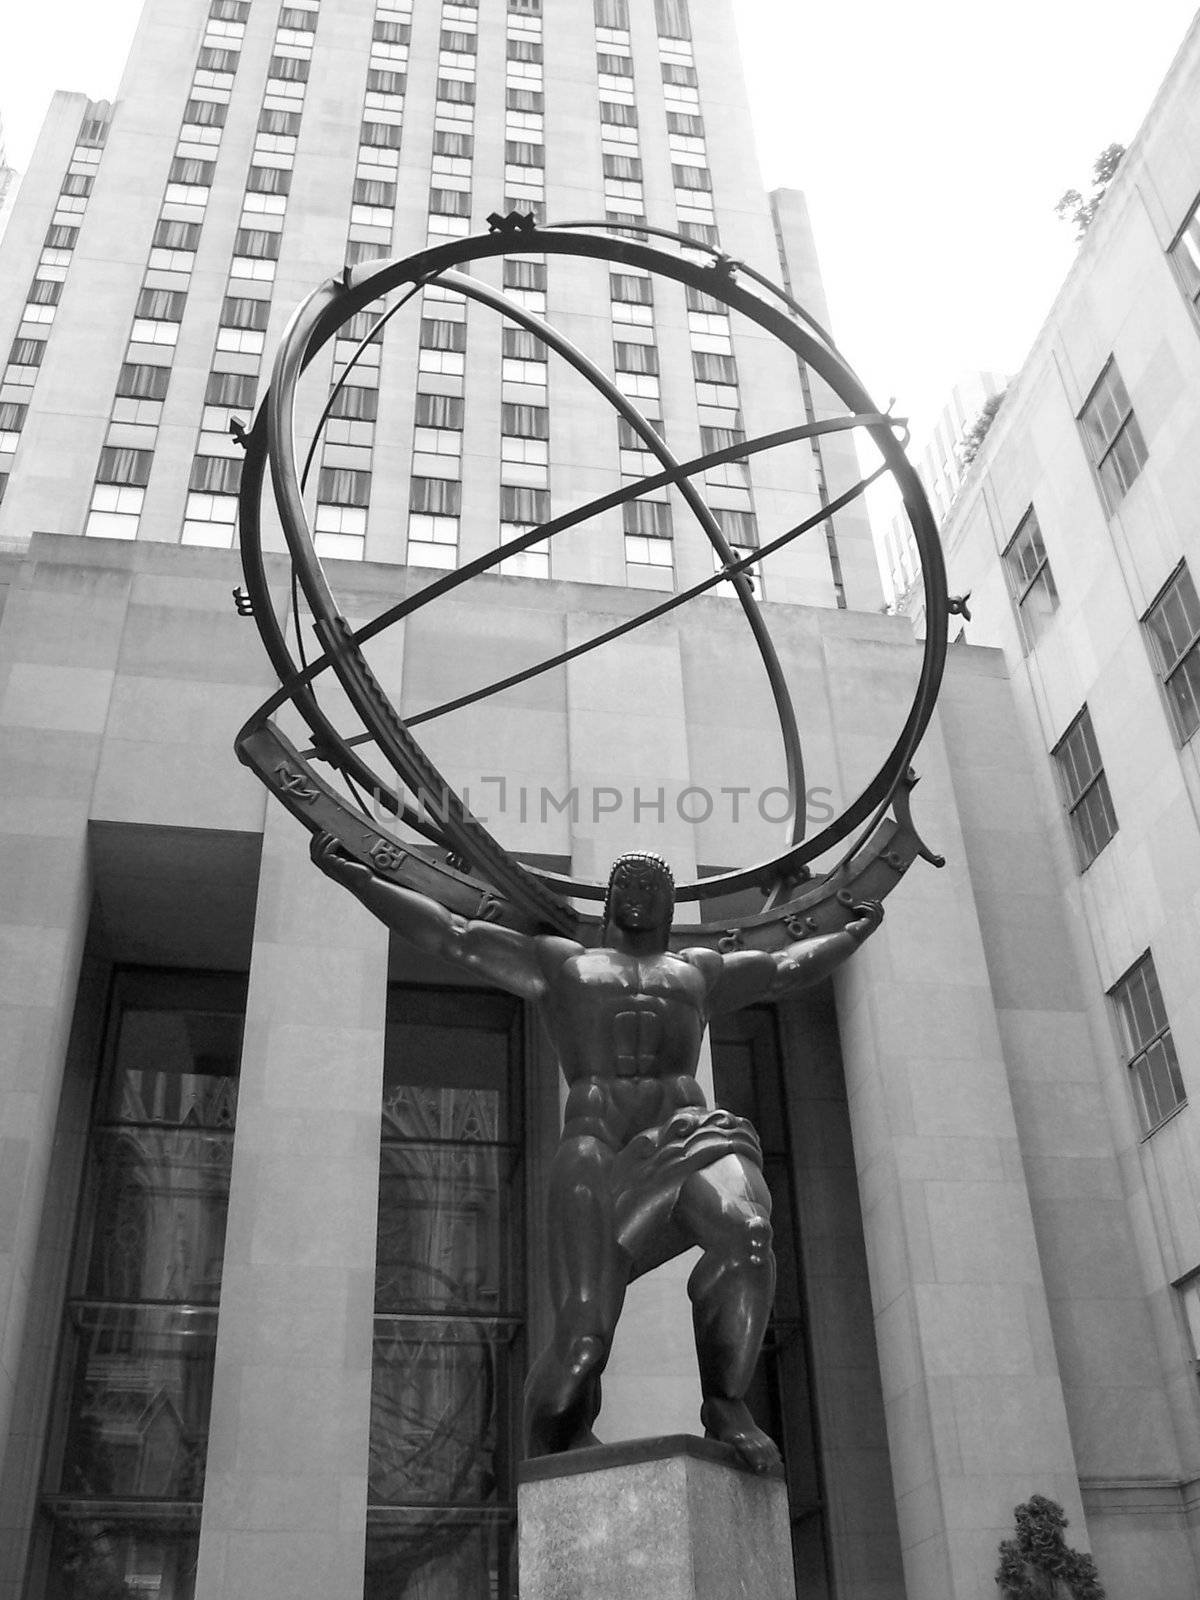 This is the statue of atlas across from St. Patrick's Cathedral in New York City.